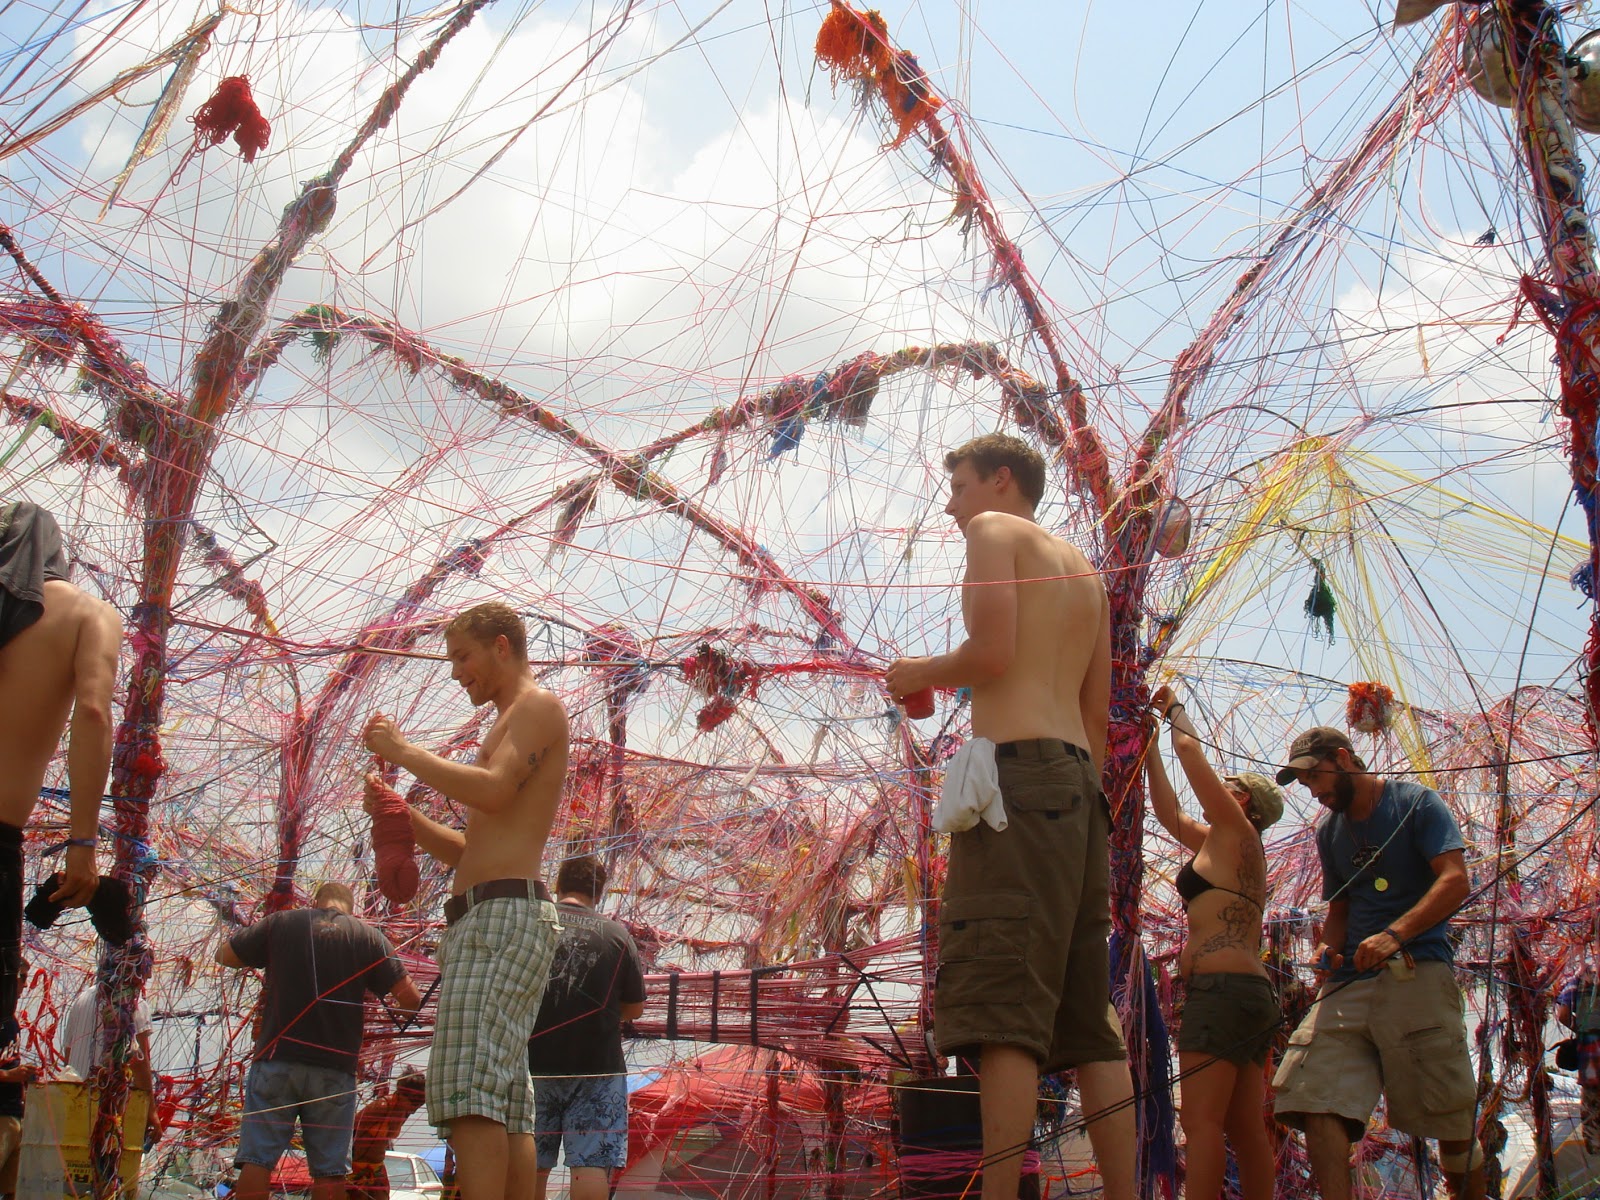 People in the String Exhibit, Bonnaroo 2008